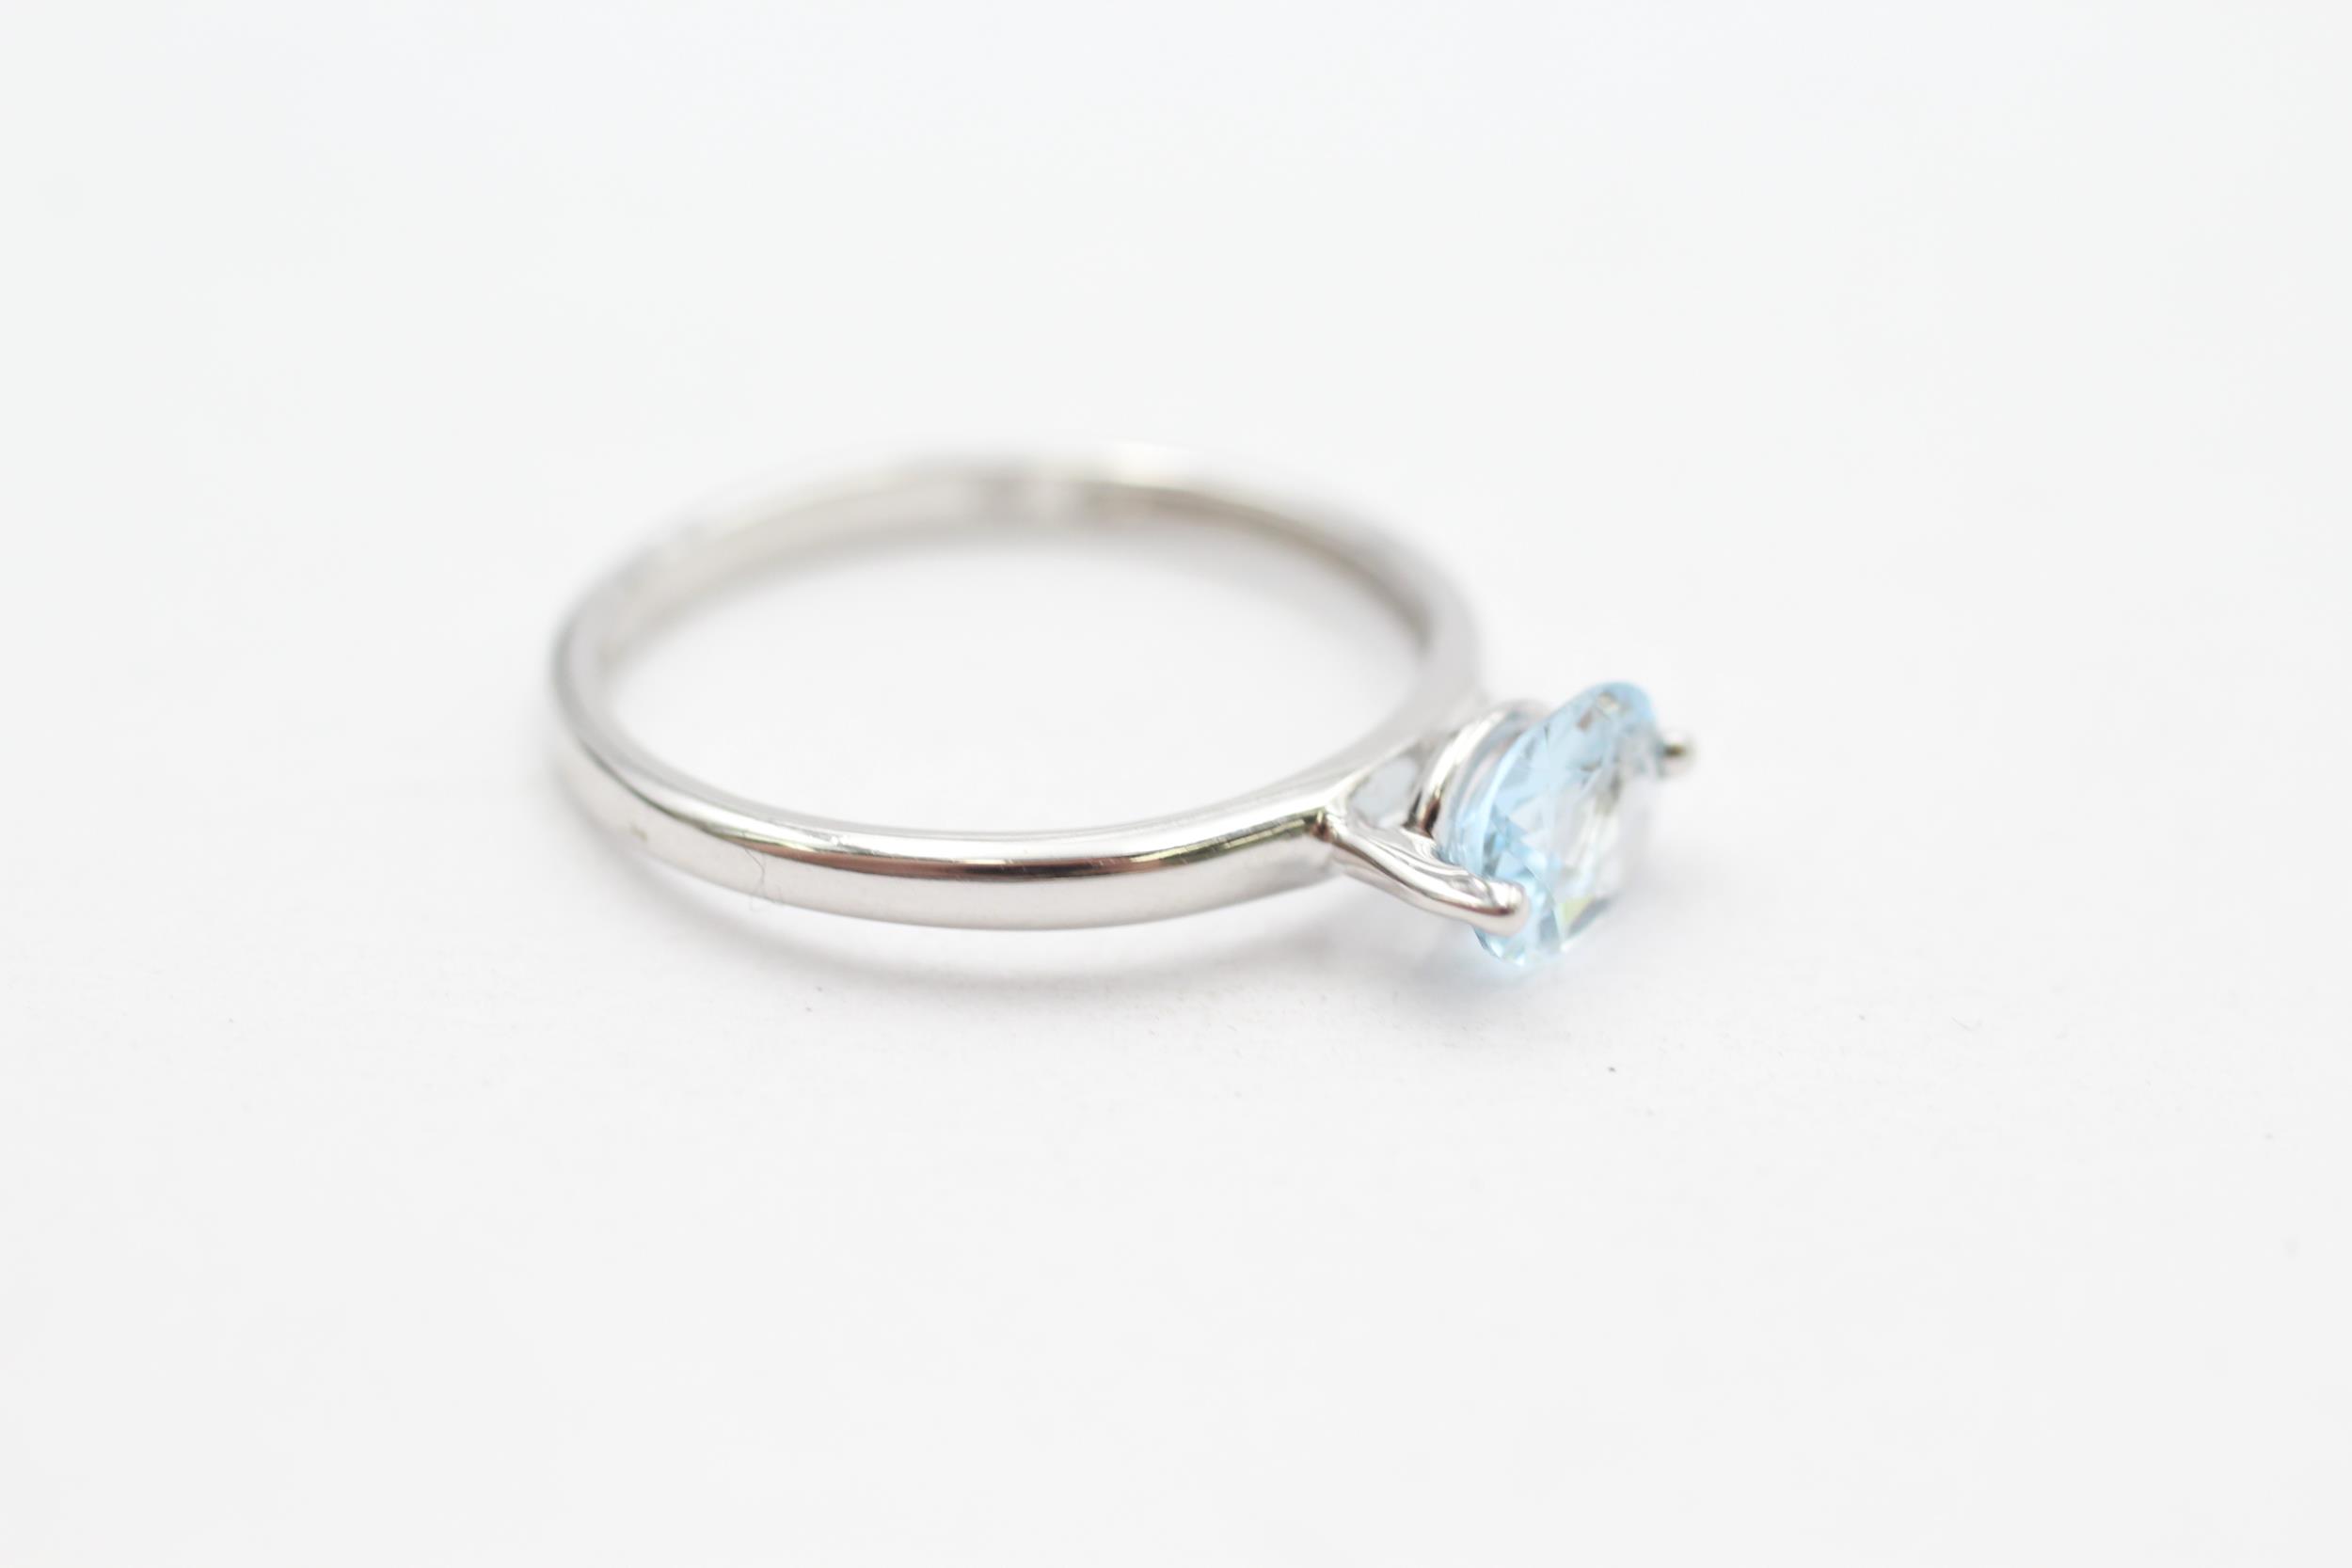 9ct gold oval cut aquamarine solitaire ring Size M - 1.4 g - Image 2 of 4